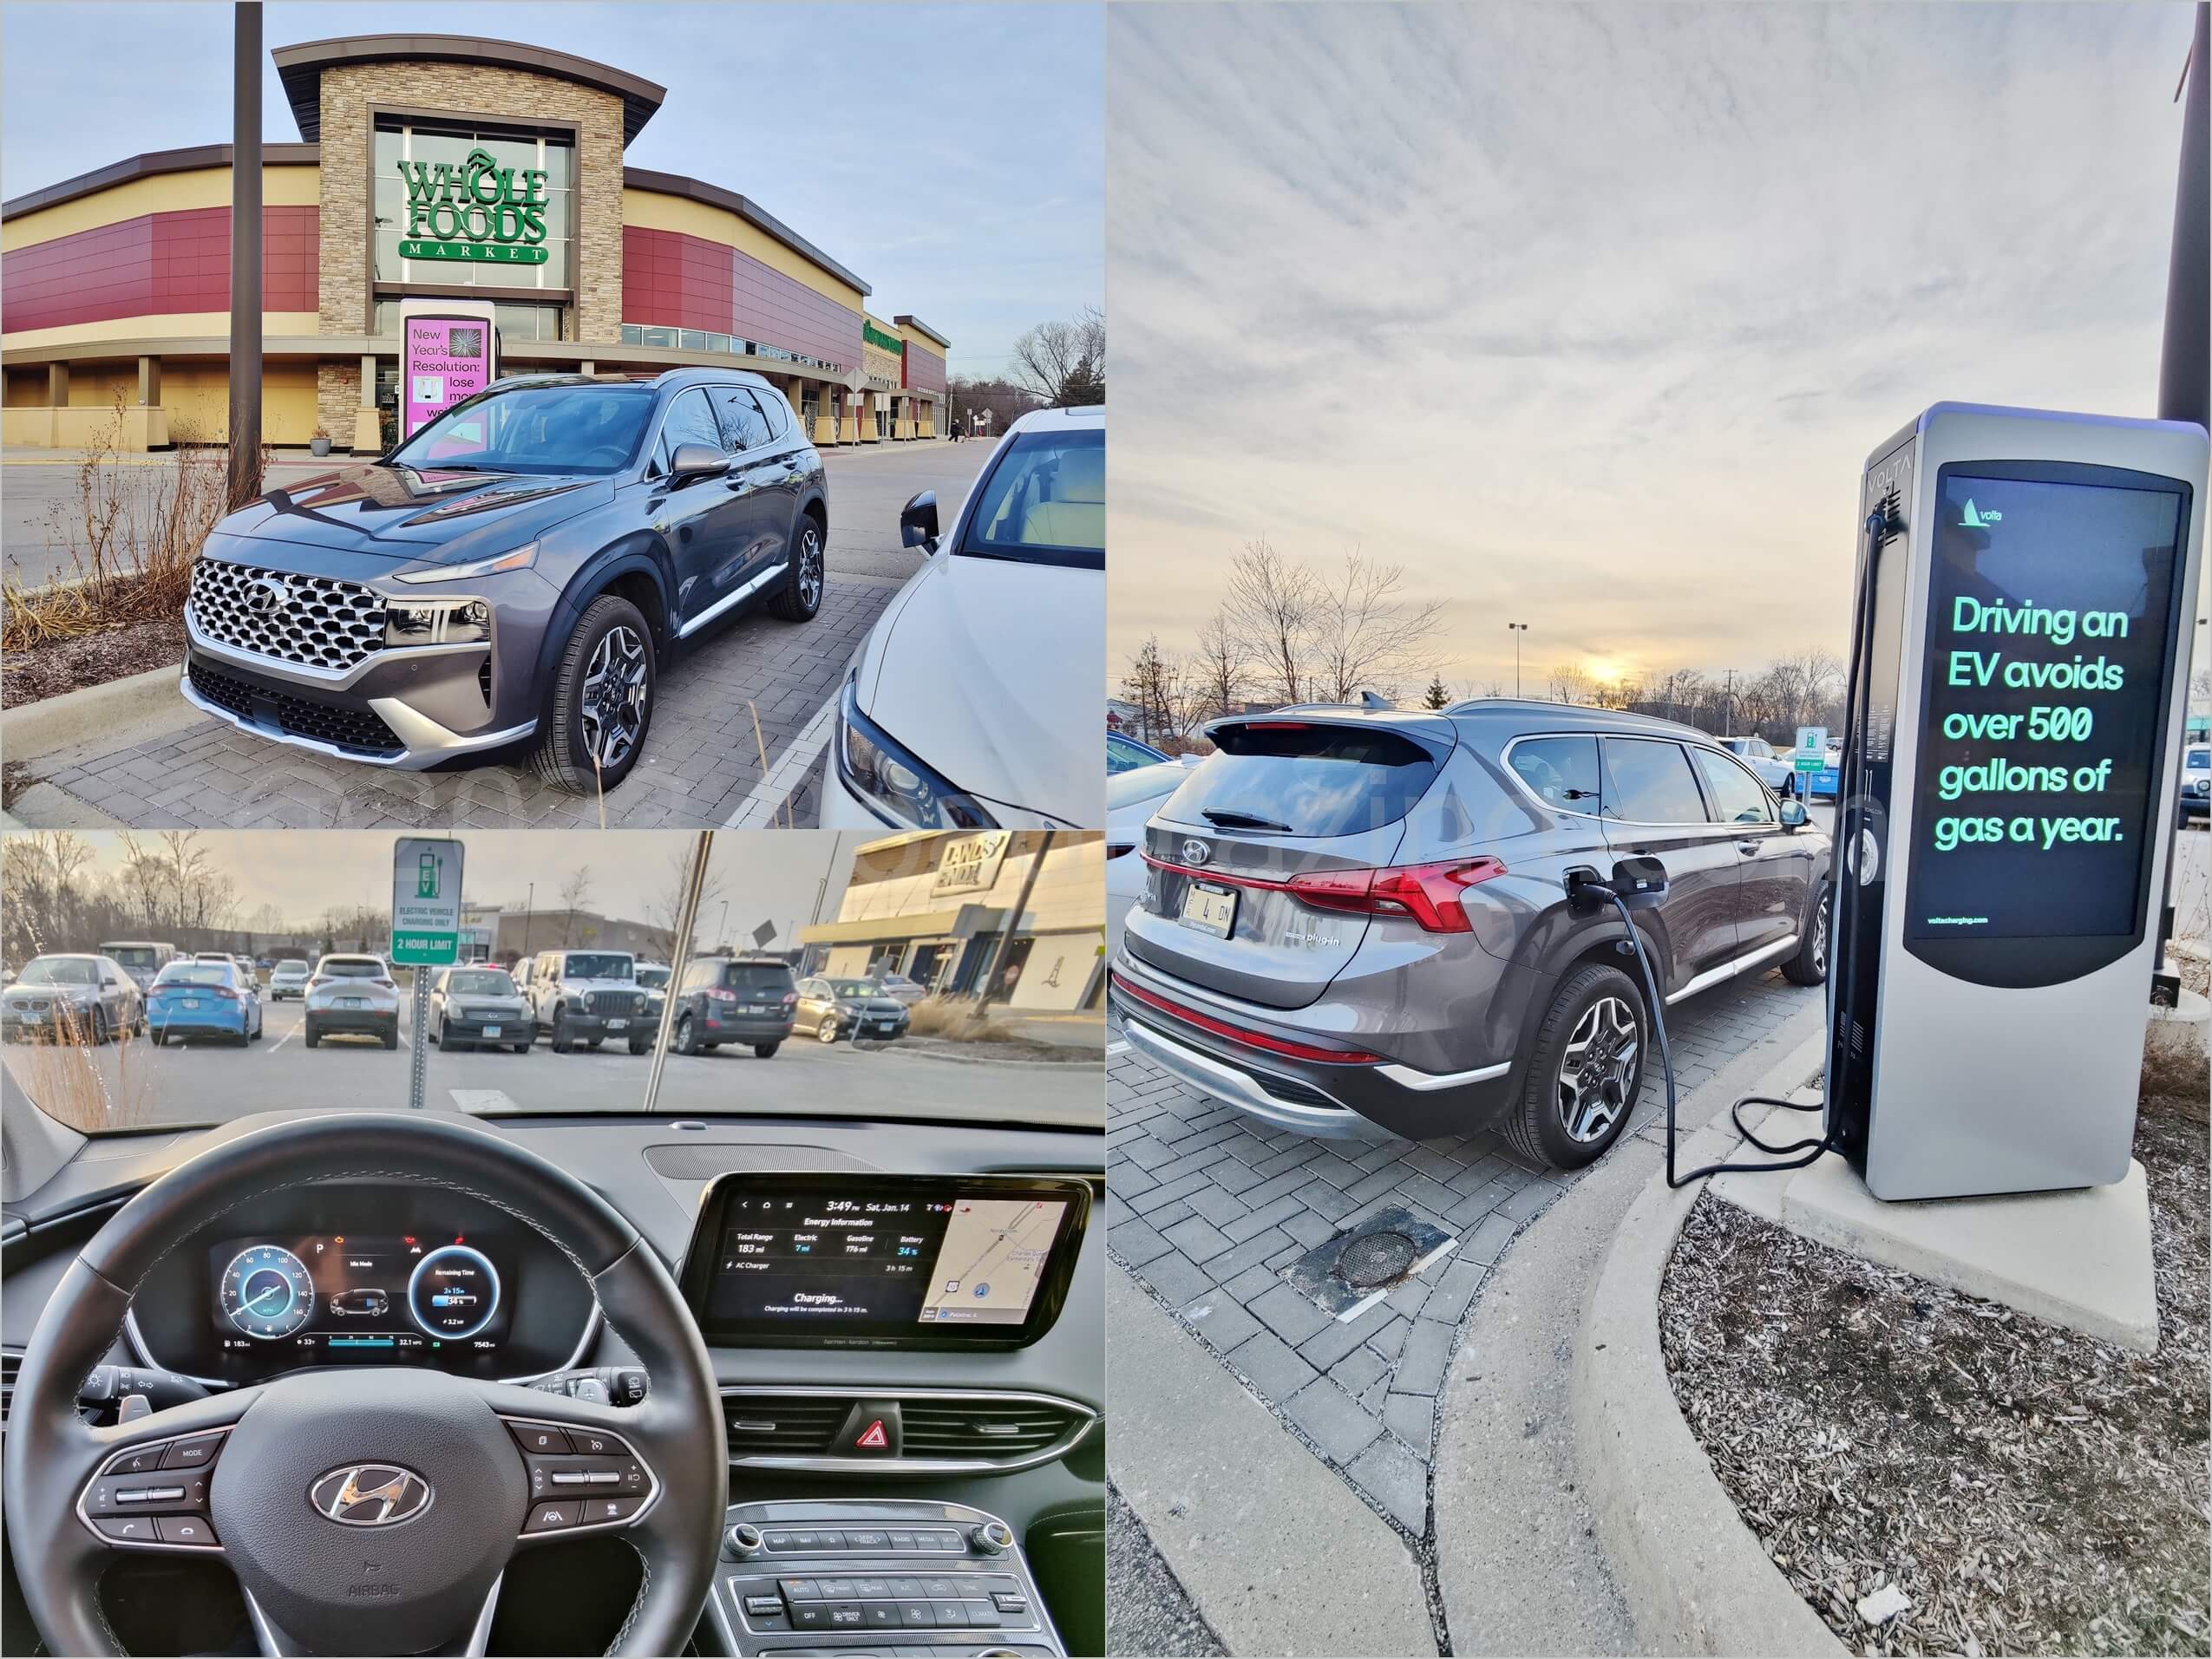 2022 Hyundai Santa Fe Limited PHEV AWD: adding joules at local Whole Foods L2 6 kW charger is free of cost w/ clever EV ditties